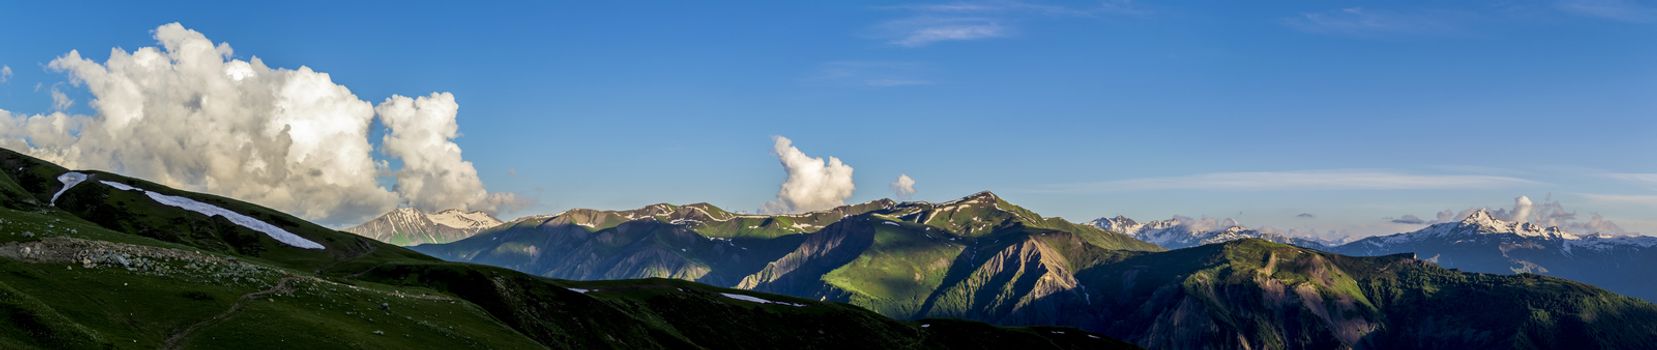 Wide mountain panorama.Green hills with snow on peaks in evening sunlight. Dark shadows. Blue sky with some clouds. Summer in Georgia.